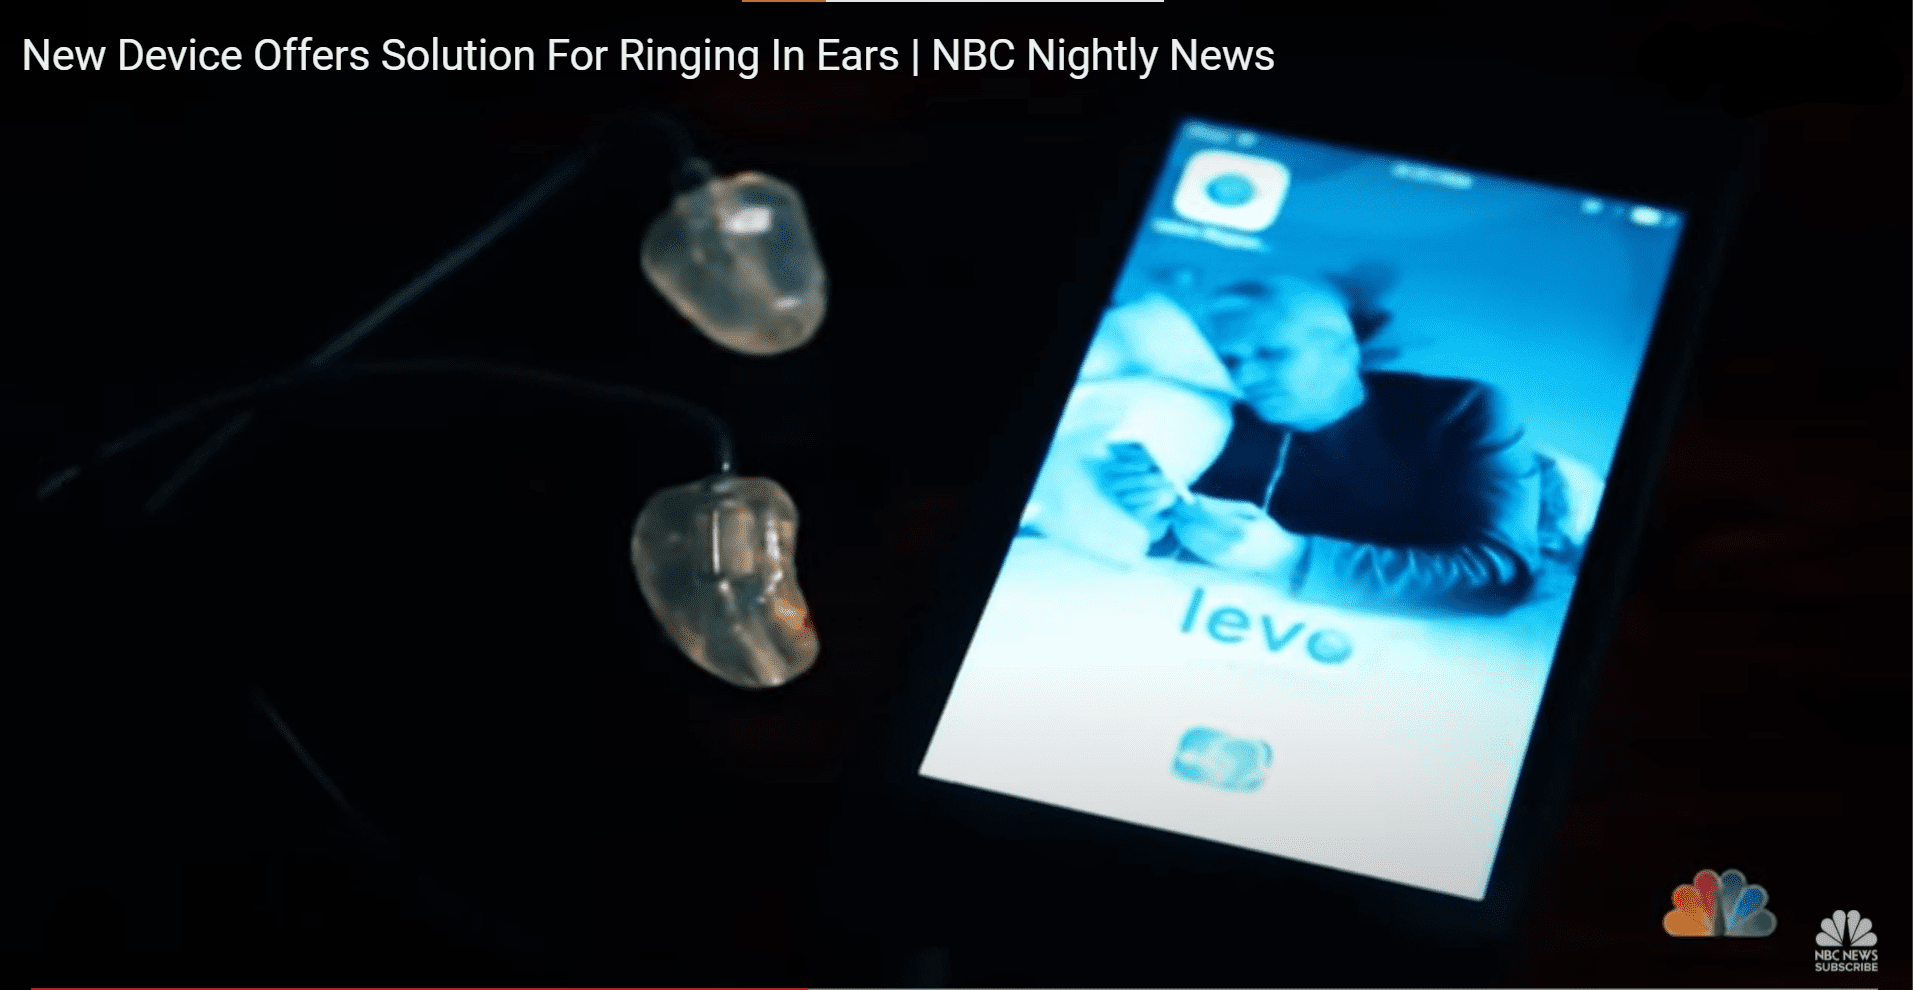 New Device Offers Solution For Ringing In Ears | NBC Nightly News